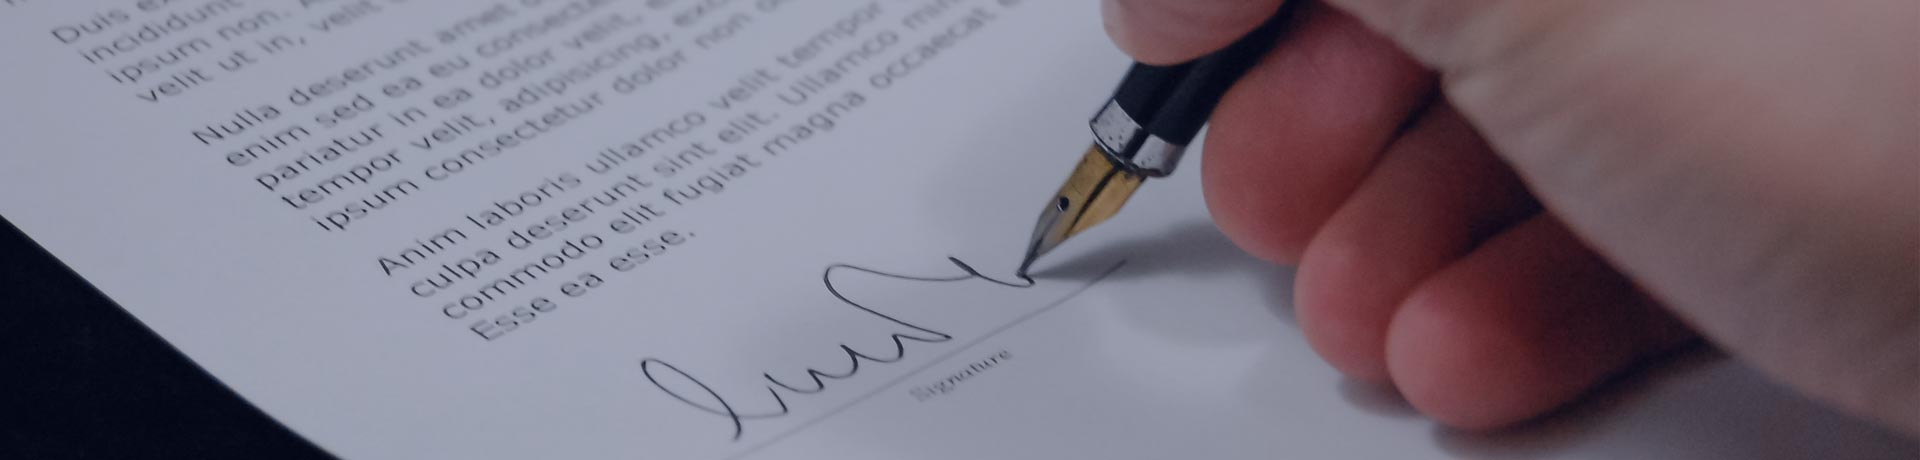 hand with a pen doing its signature on a contract